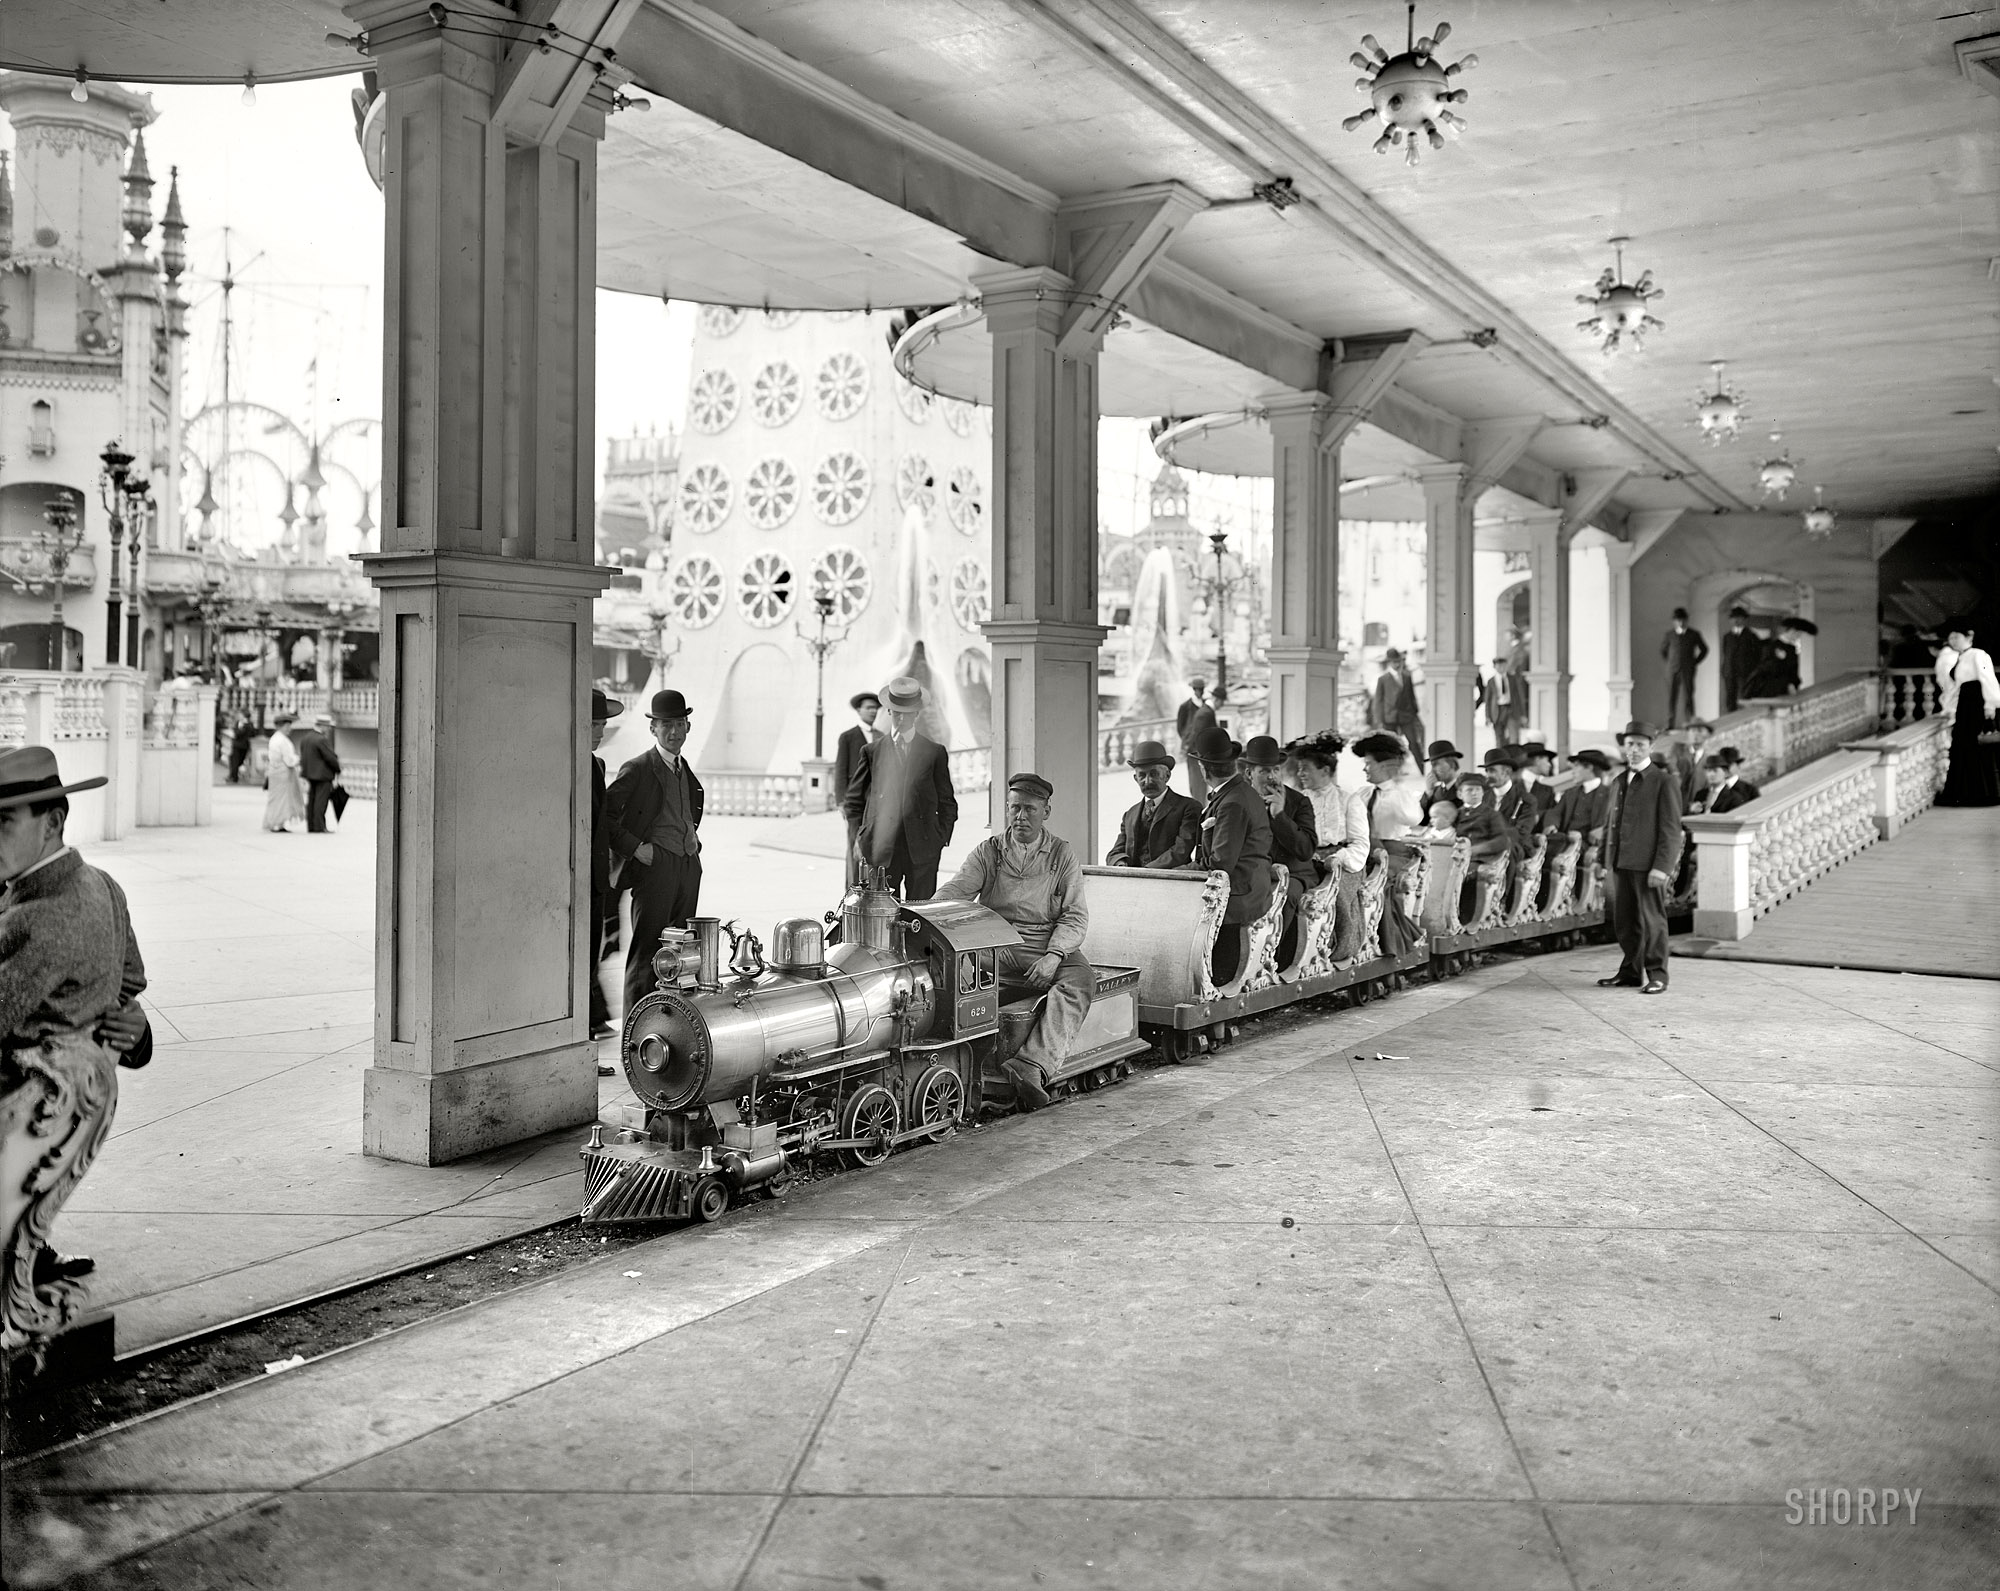 New York circa 1905. "Miniature railway, Coney Island." All aboard! 8x10 inch dry plate glass negative, Detroit Publishing Company. View full size.